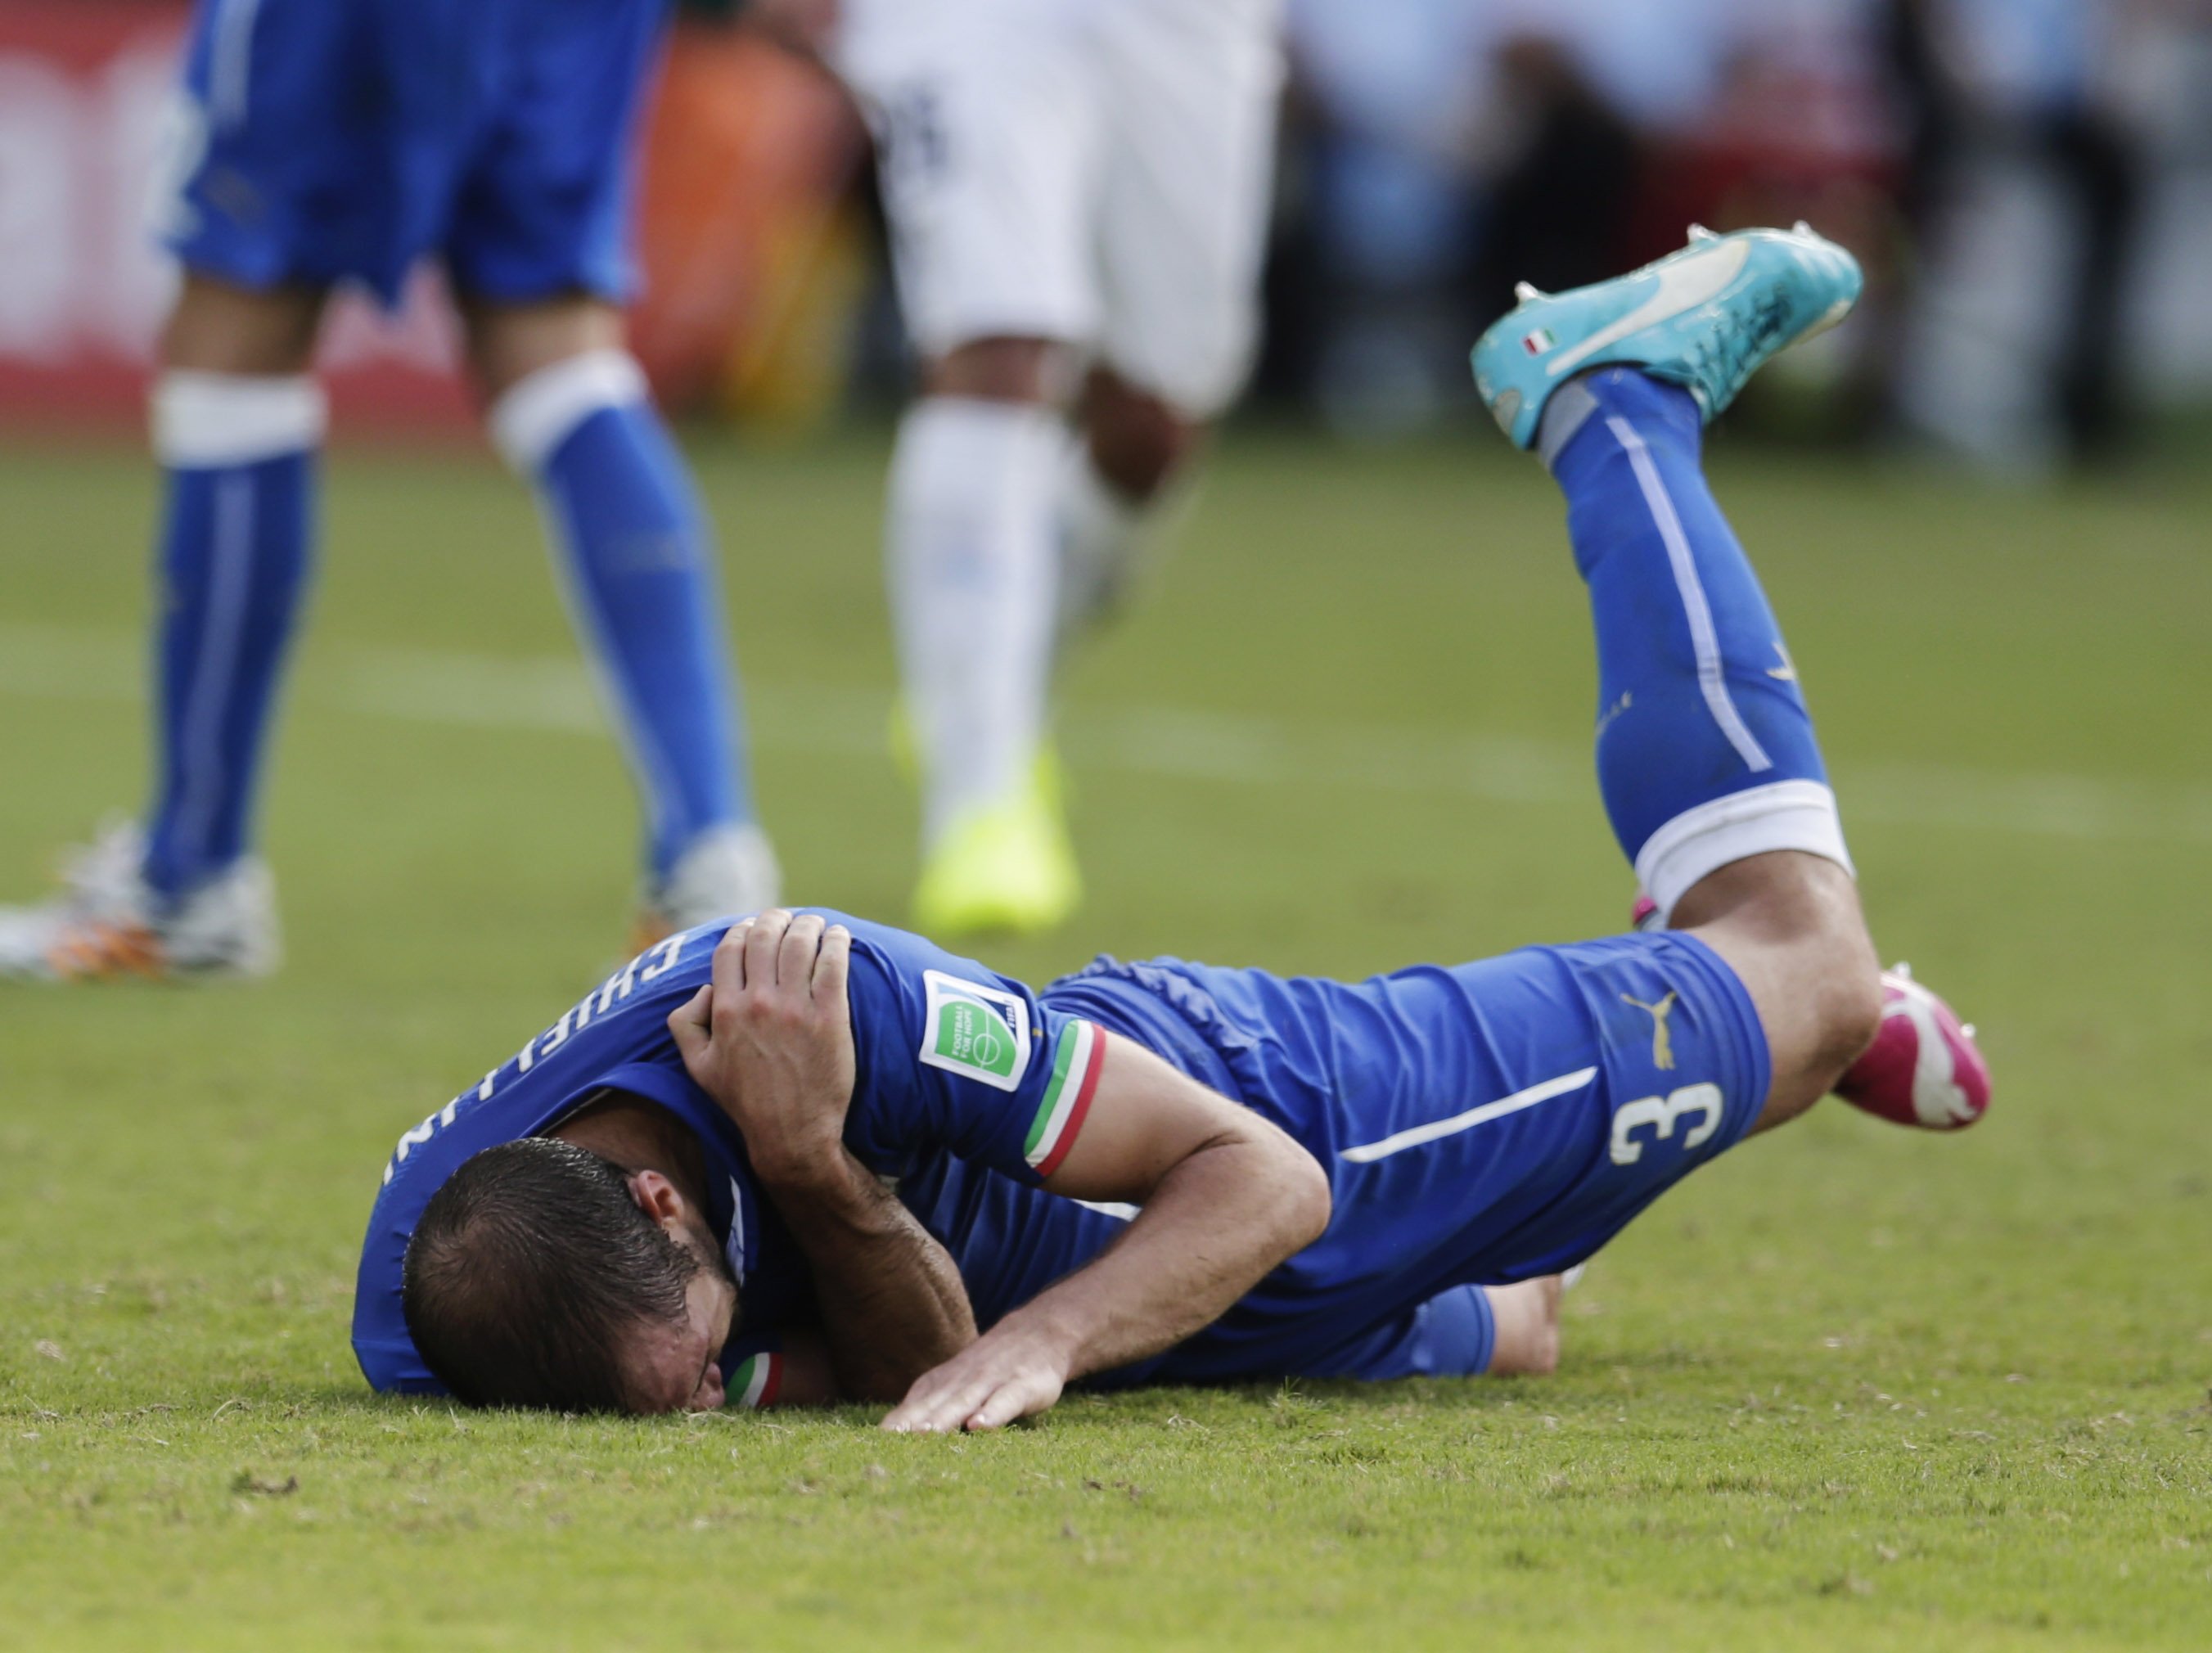 Italy's Giorgio Chiellini holds his shoulder after Uruguay's Luis Suarez ran into it with his teeth during the group D World Cup soccer match between Italy and Uruguay at the Arena das Dunas in Natal, Brazil on June 24, 2014.